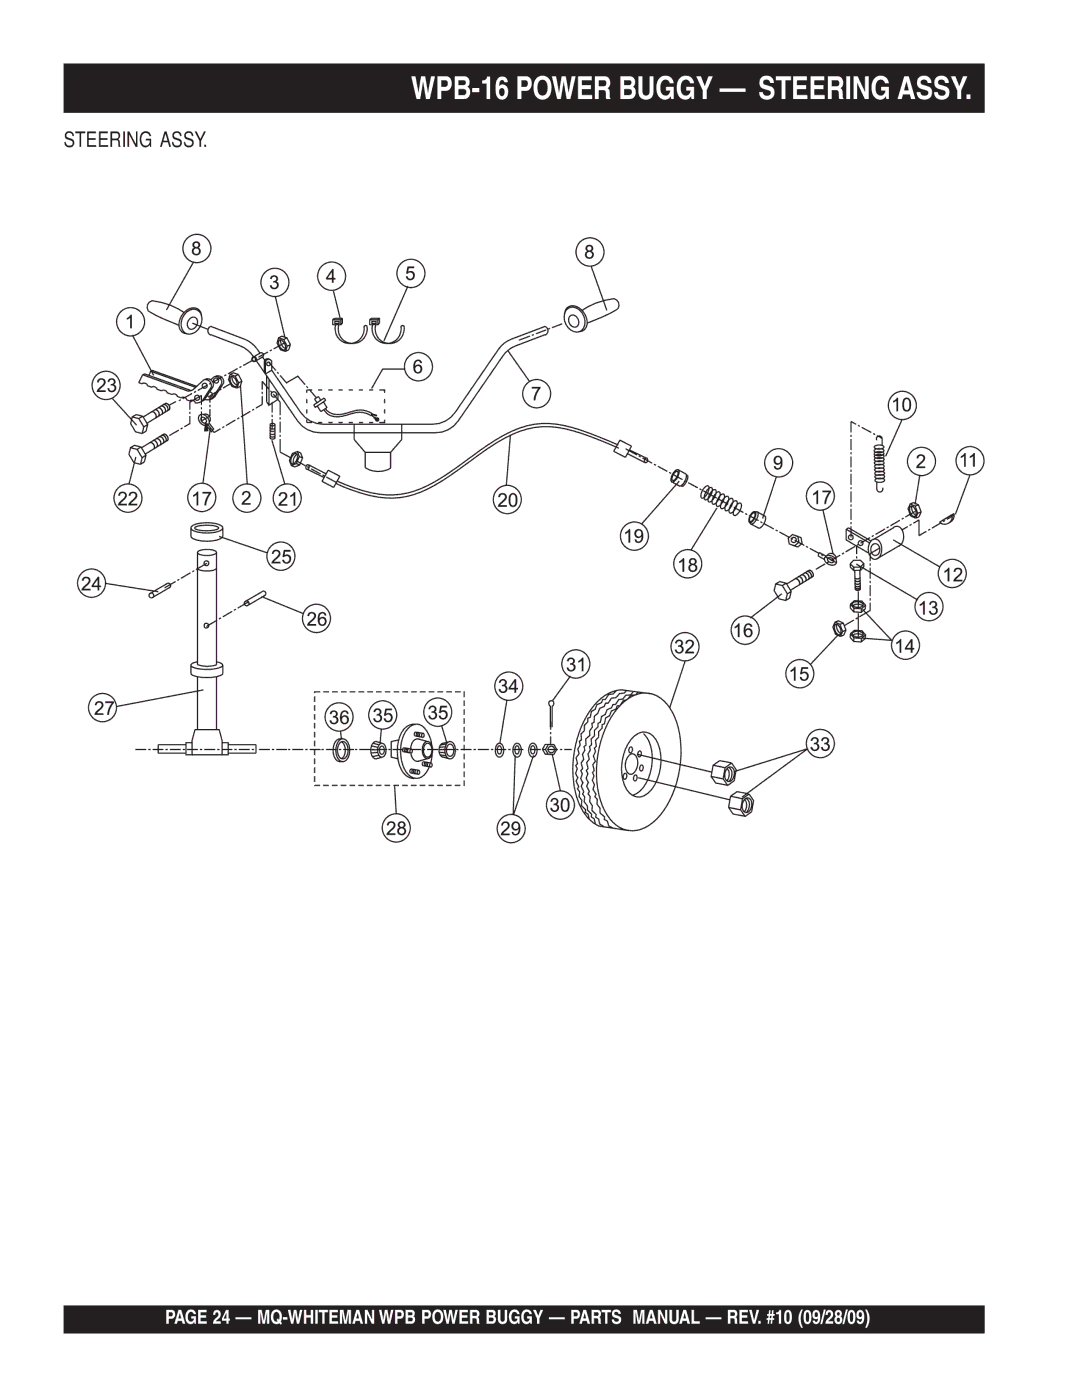 Multiquip WPB16E (Electric Start), WPB16 (Recoil Start) manual WPB-16 Power Buggy Steering Assy 